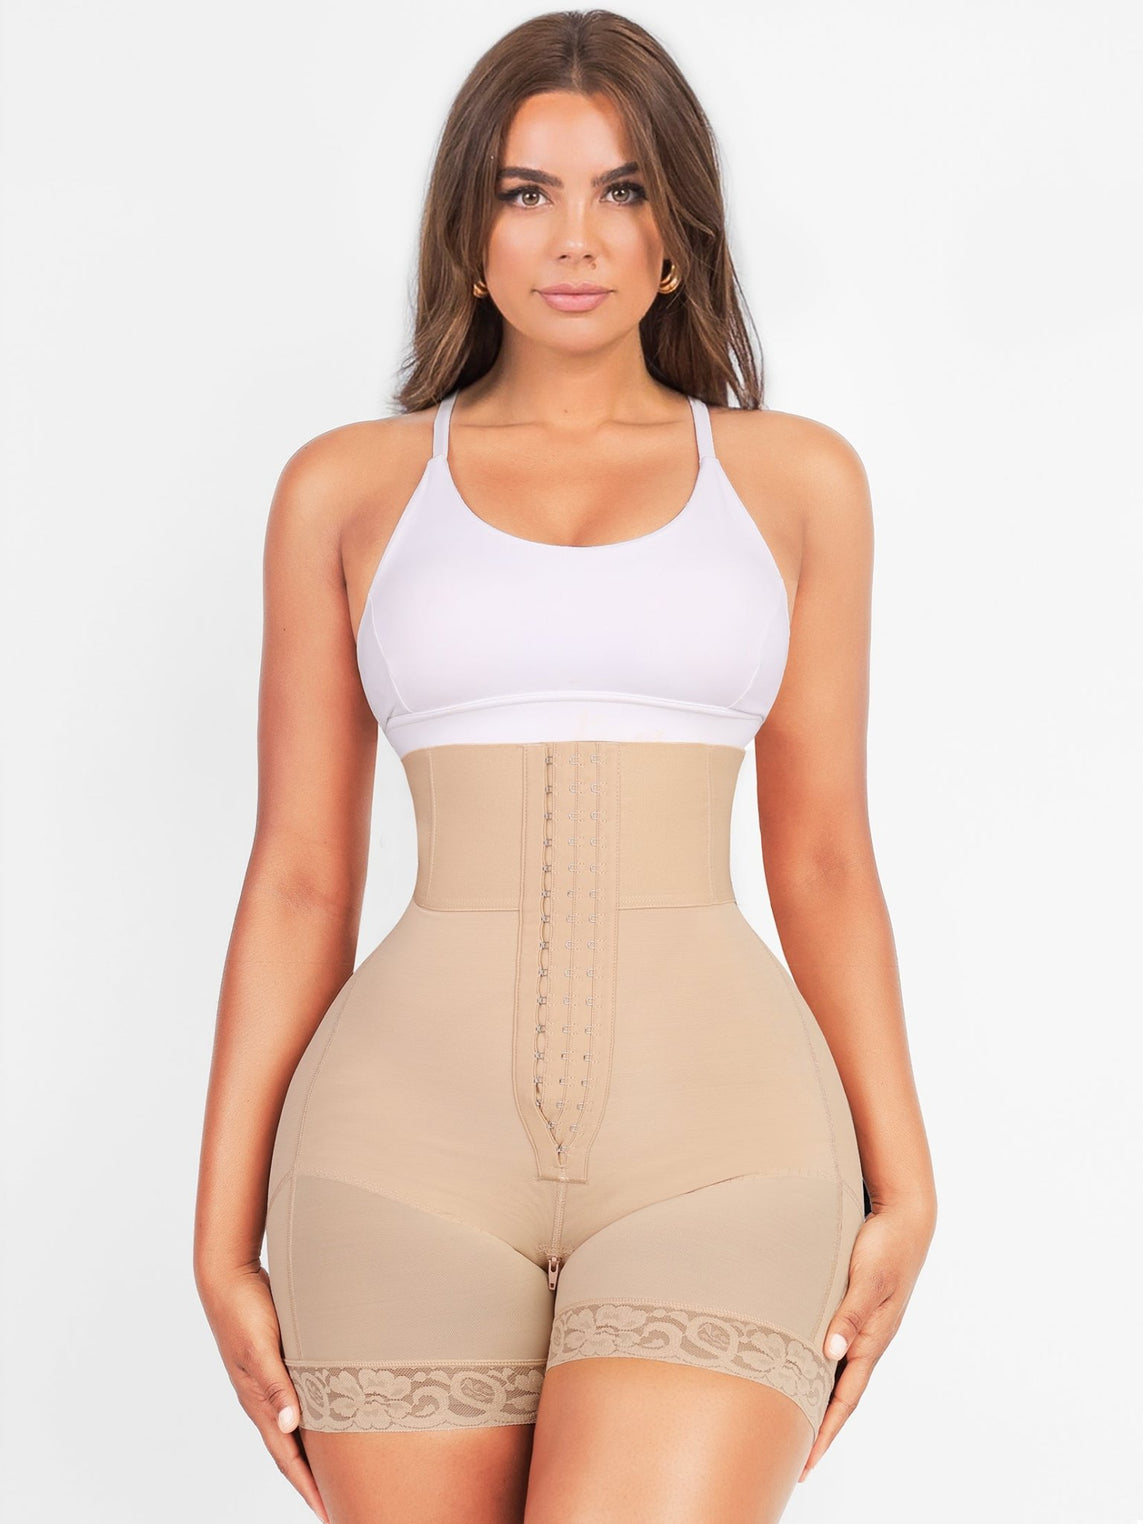 Buy High Waist Abdominal Support Girdle for Body Shaping – Gabrialla